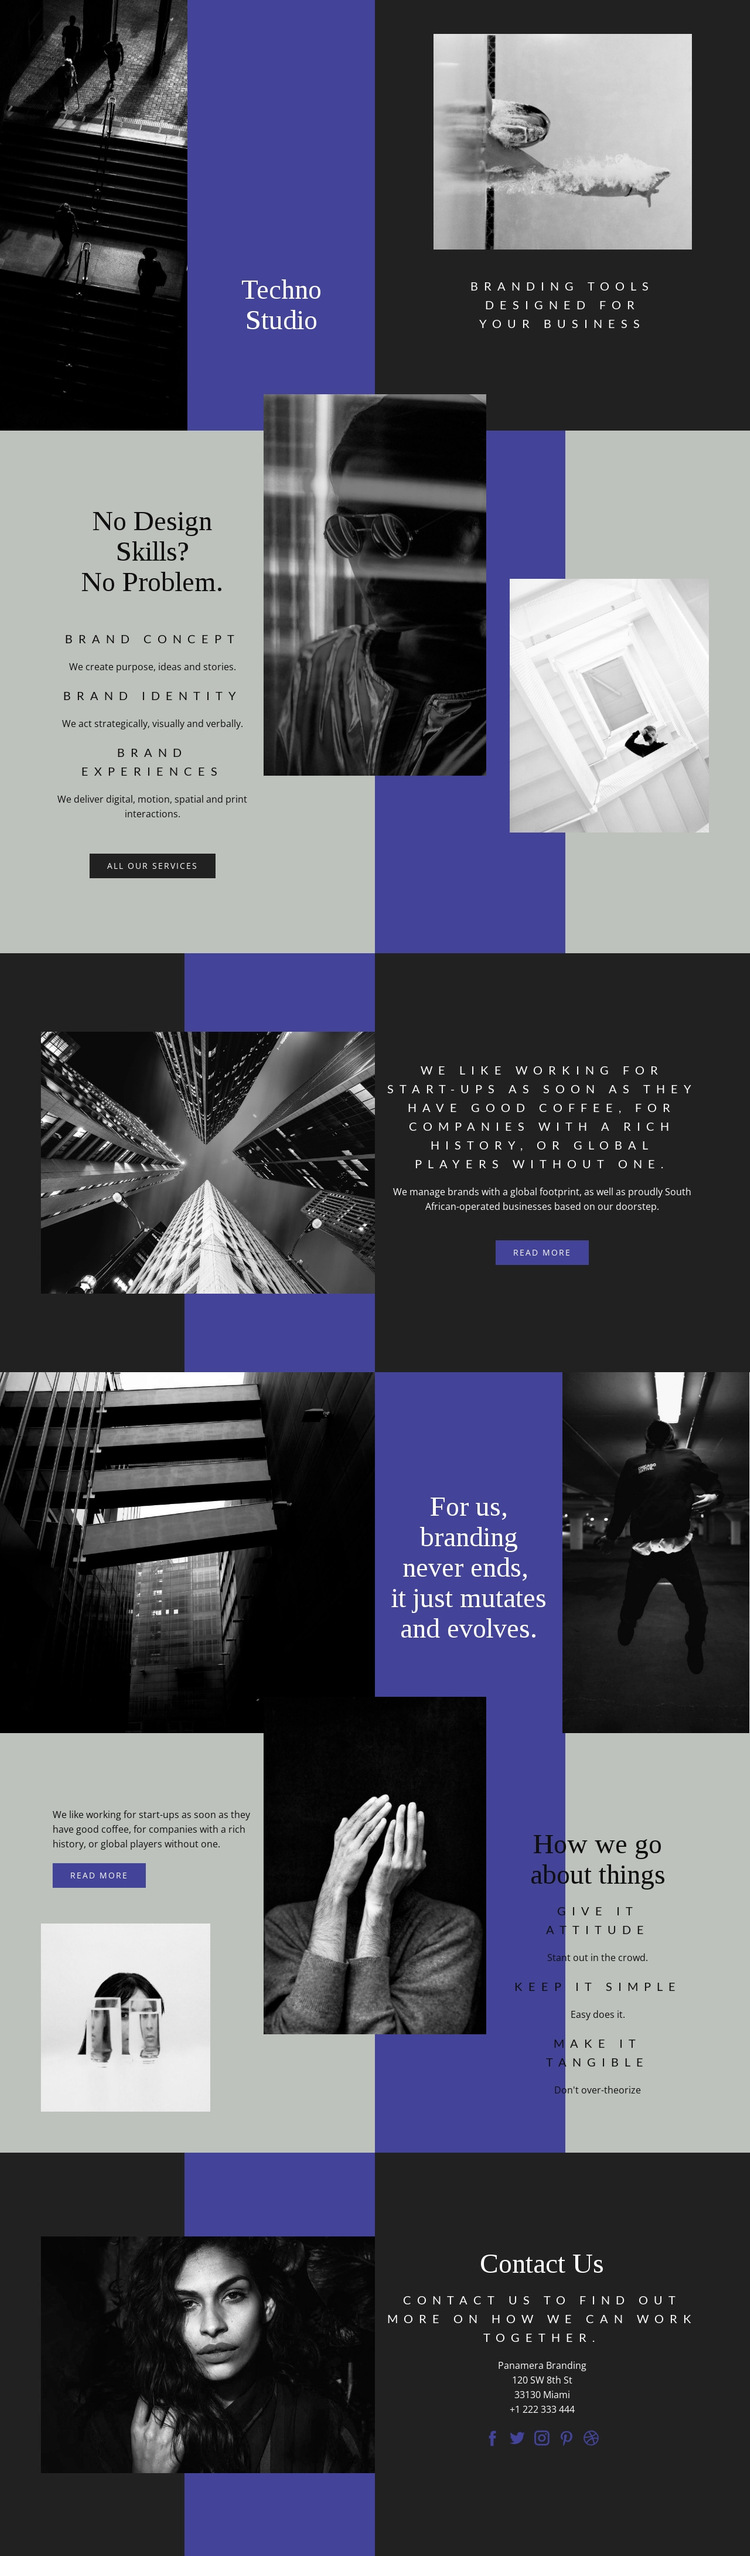 Techno skills in business HTML5 Template